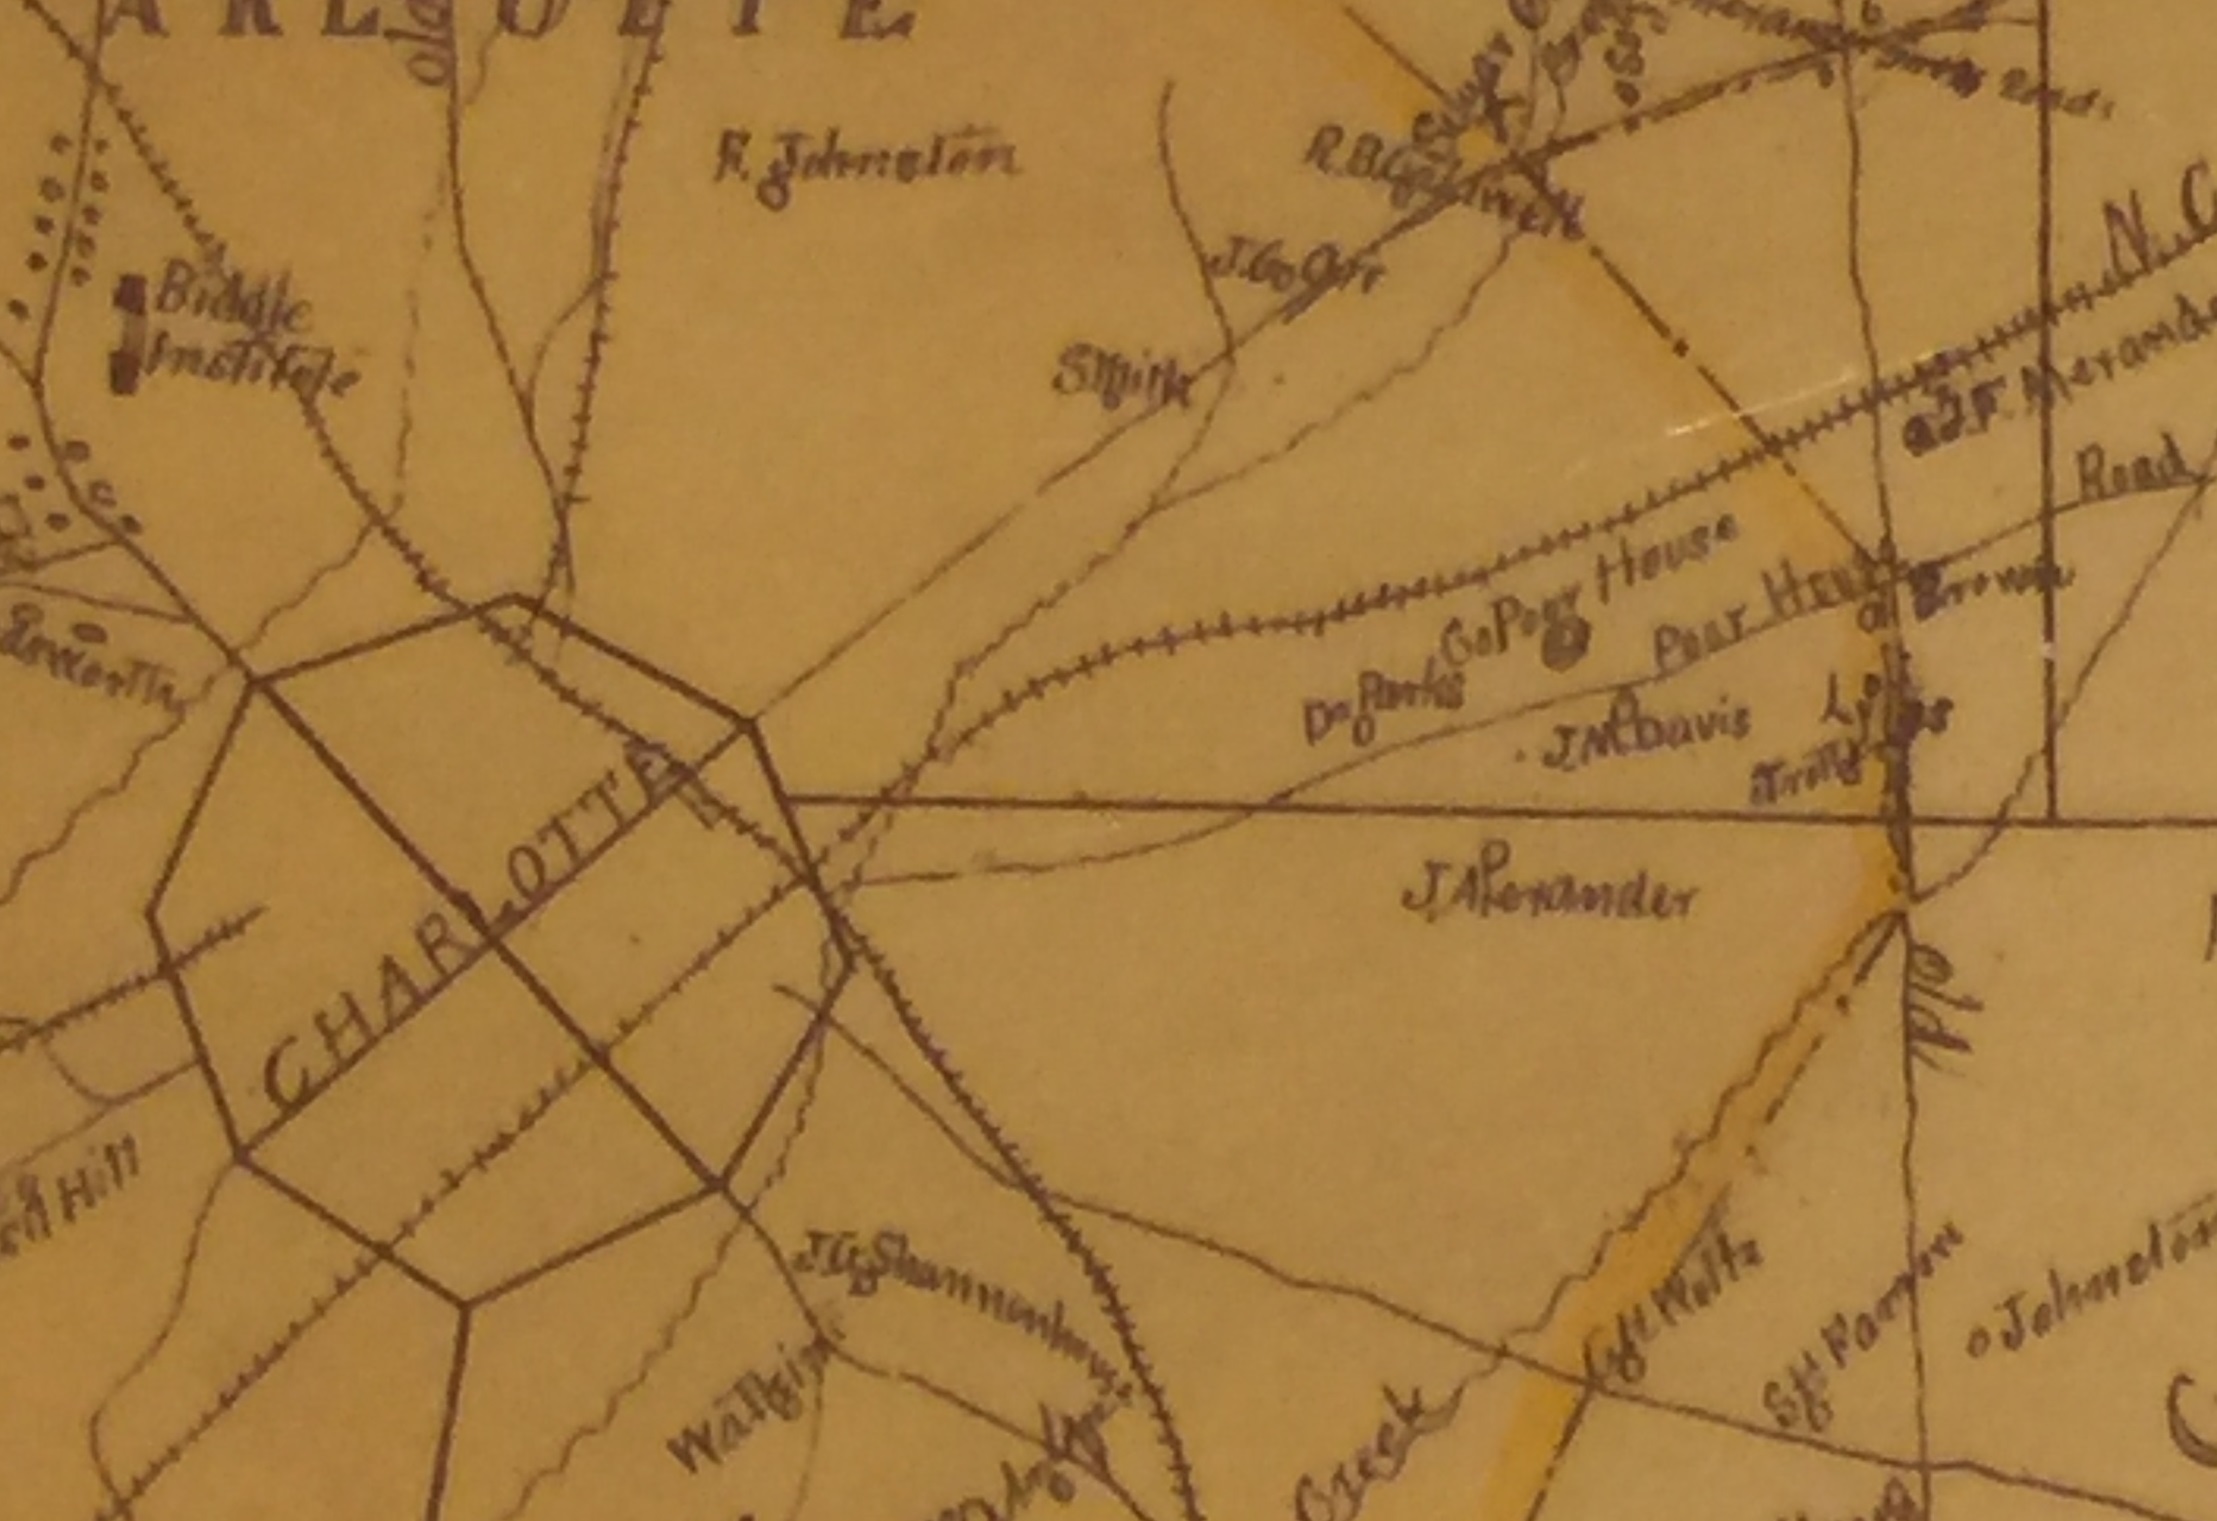 Detail from 1888 map shows Poor House and Poor House Road